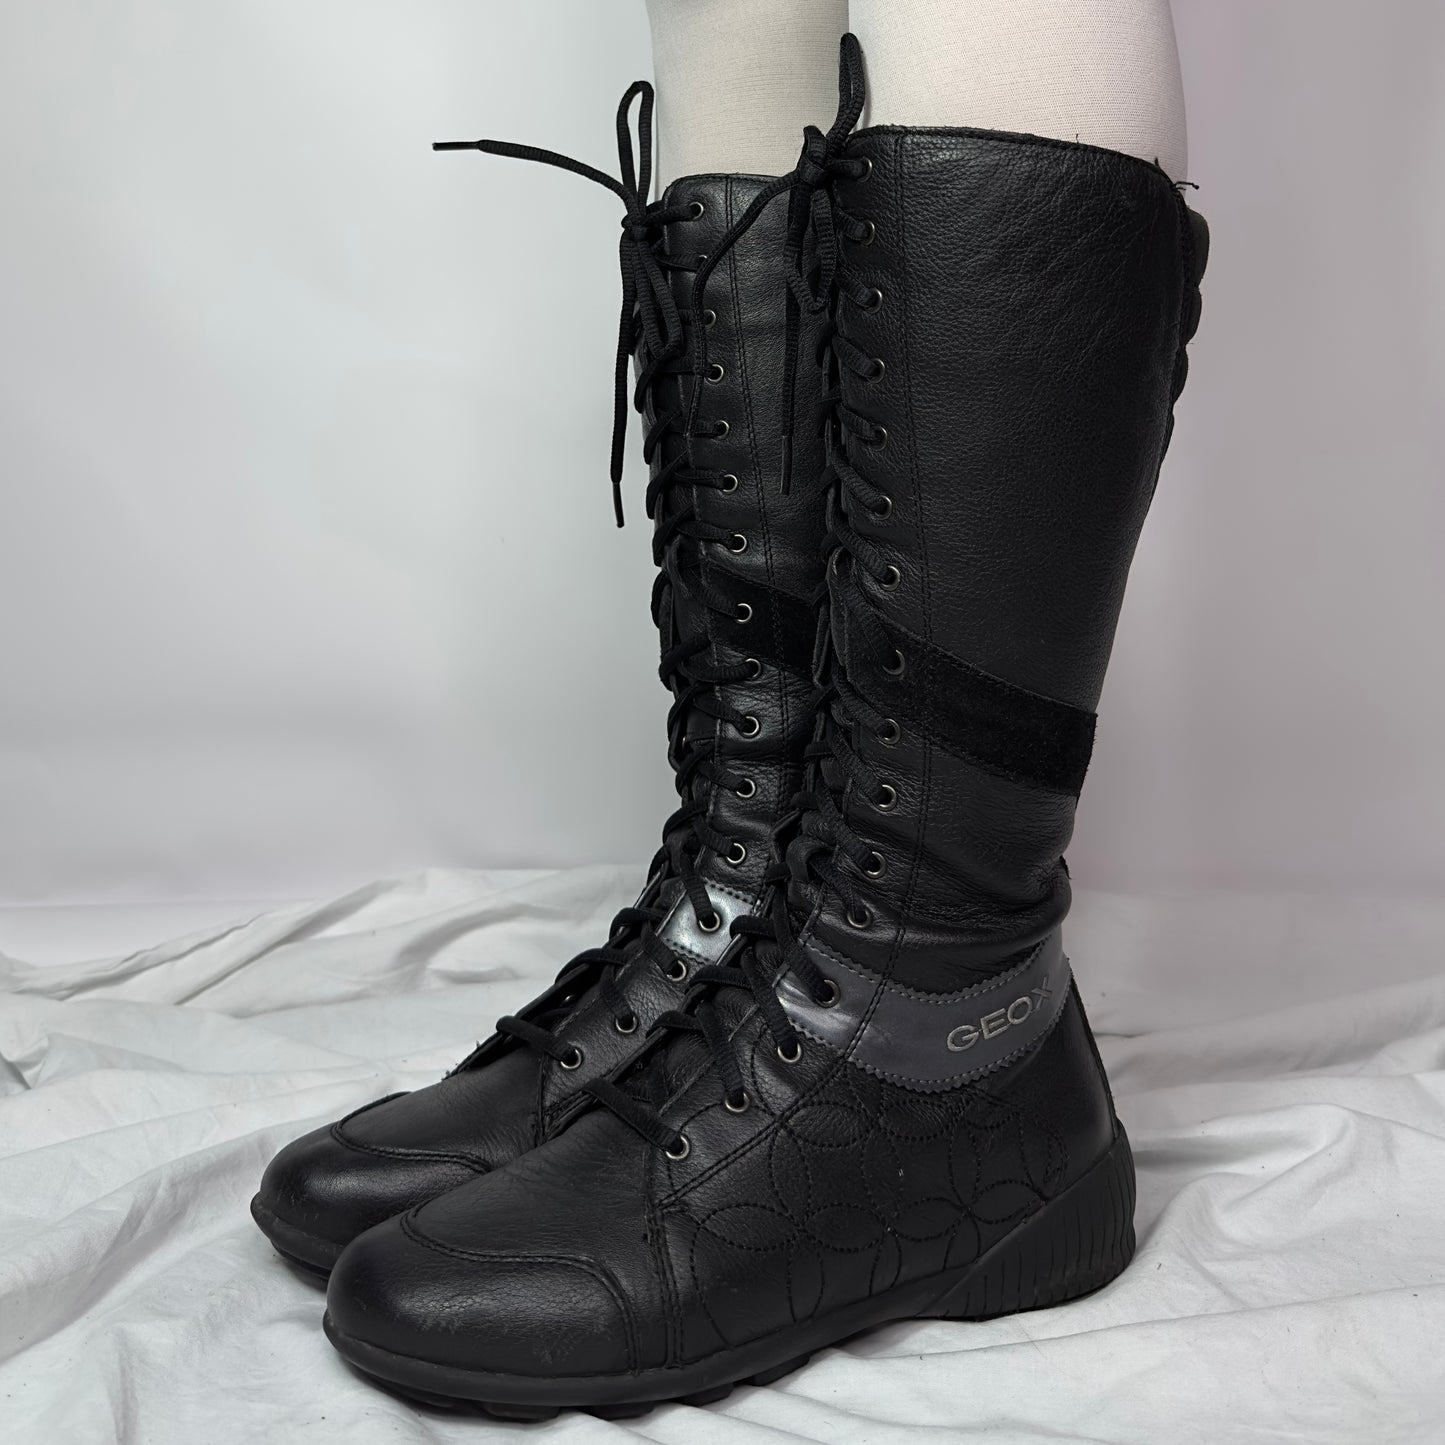 Geox Vintage Lace up Boxing Boots 38/38.5